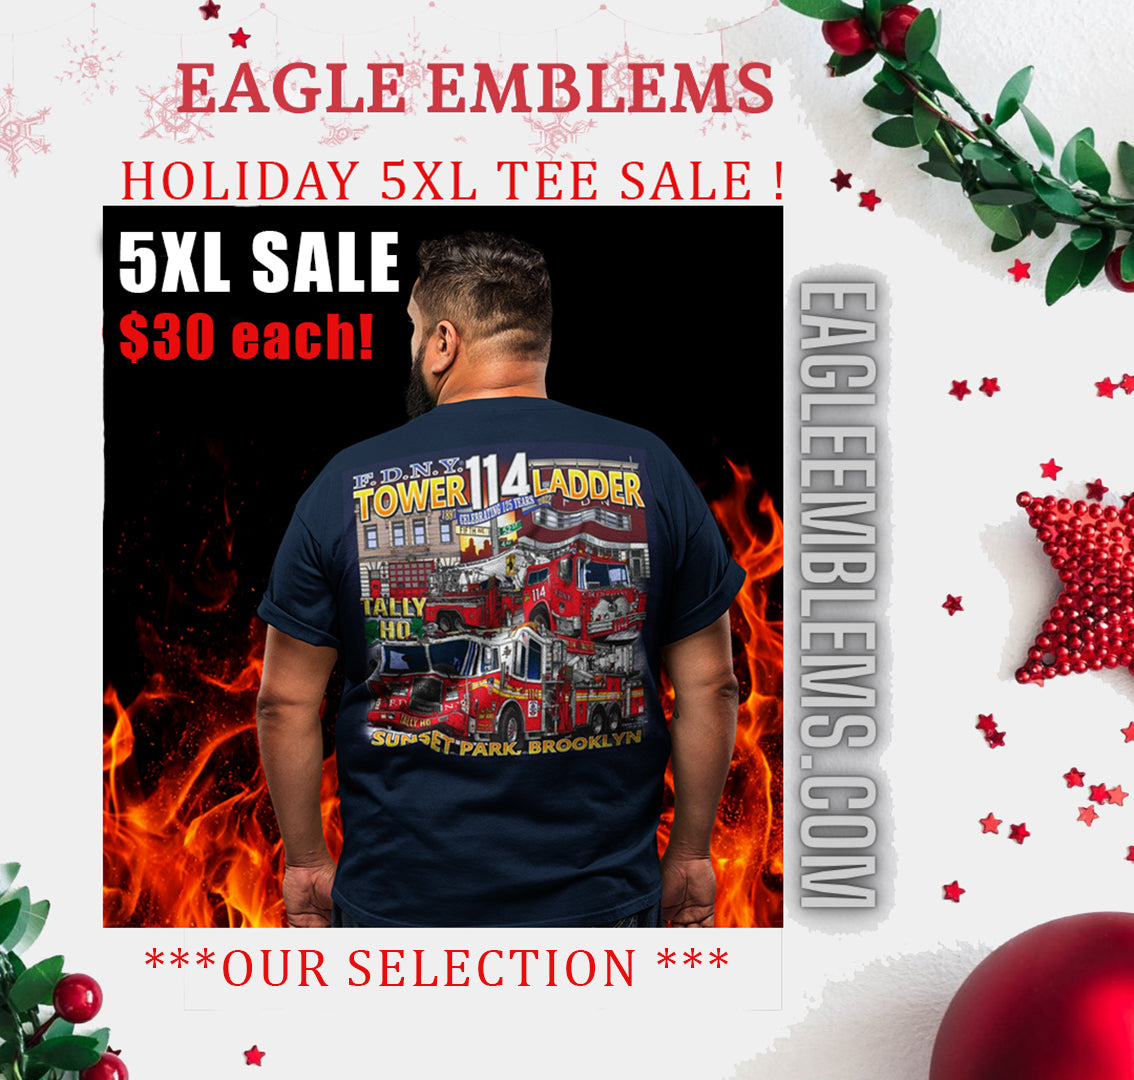 FDNY 5XL TEE HOLIDAY SALE!   5XL only $30